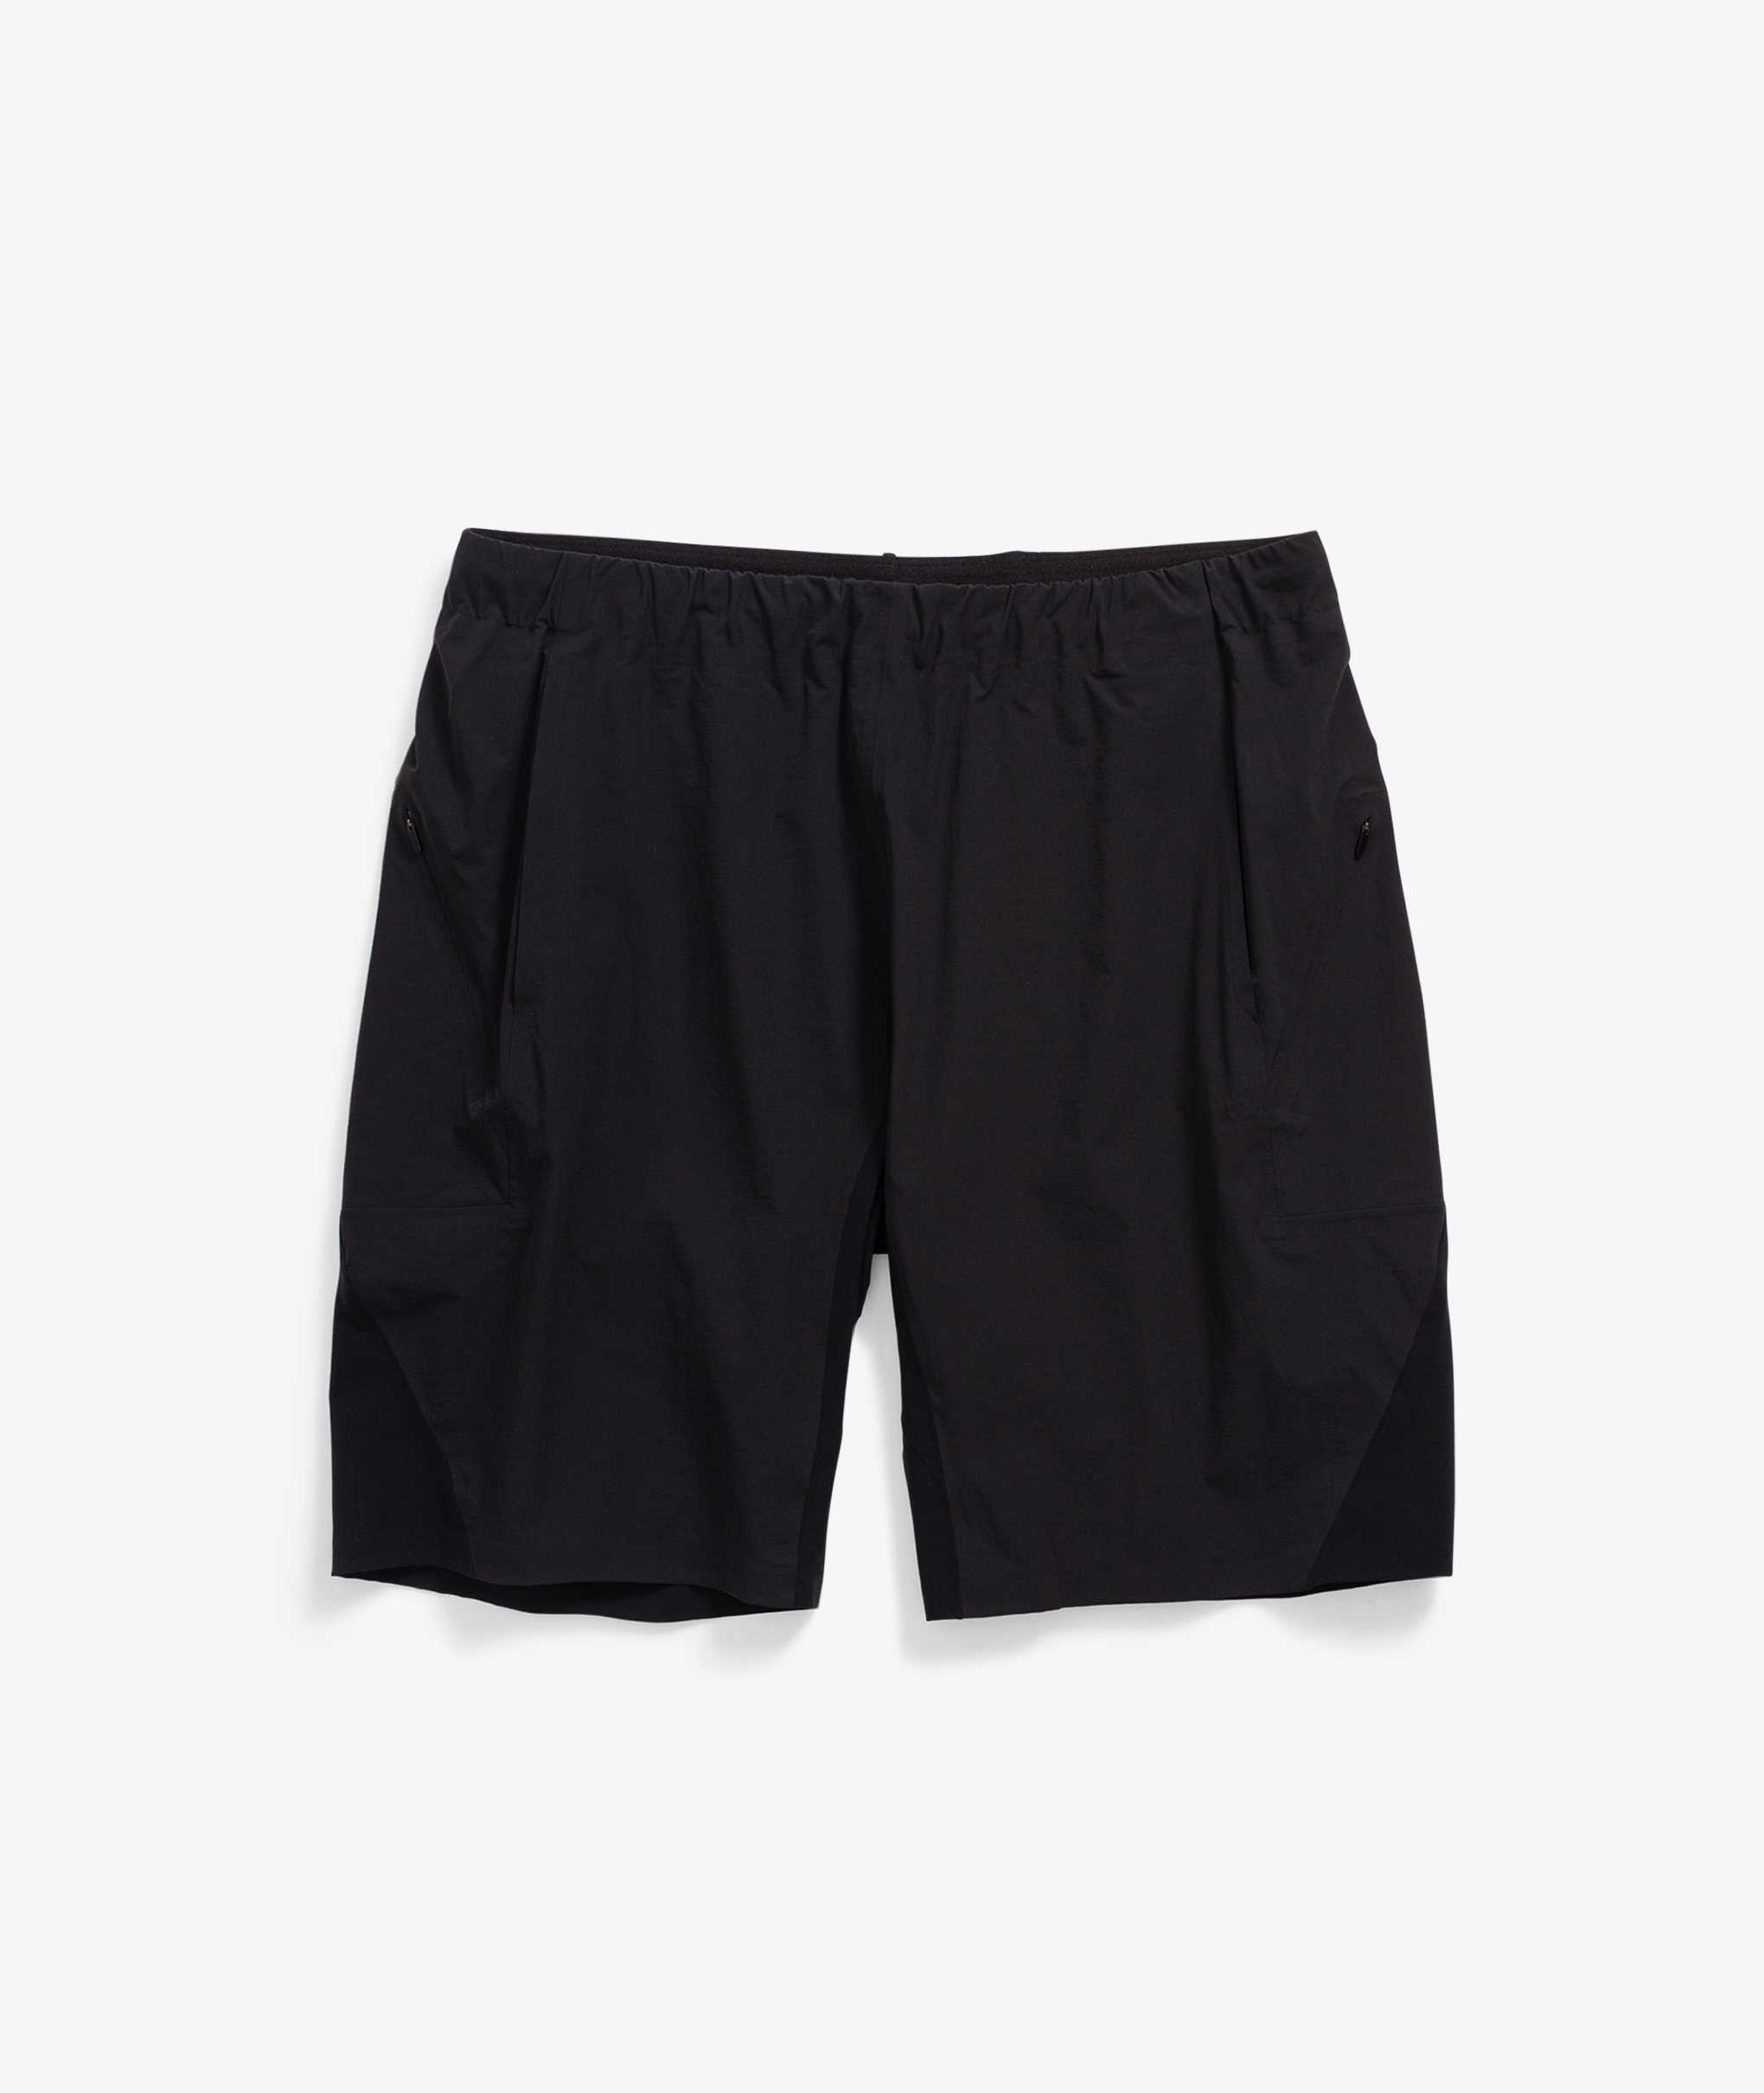 Norse Store | Shipping Worldwide - Veilance SECANT COMP SHORT M